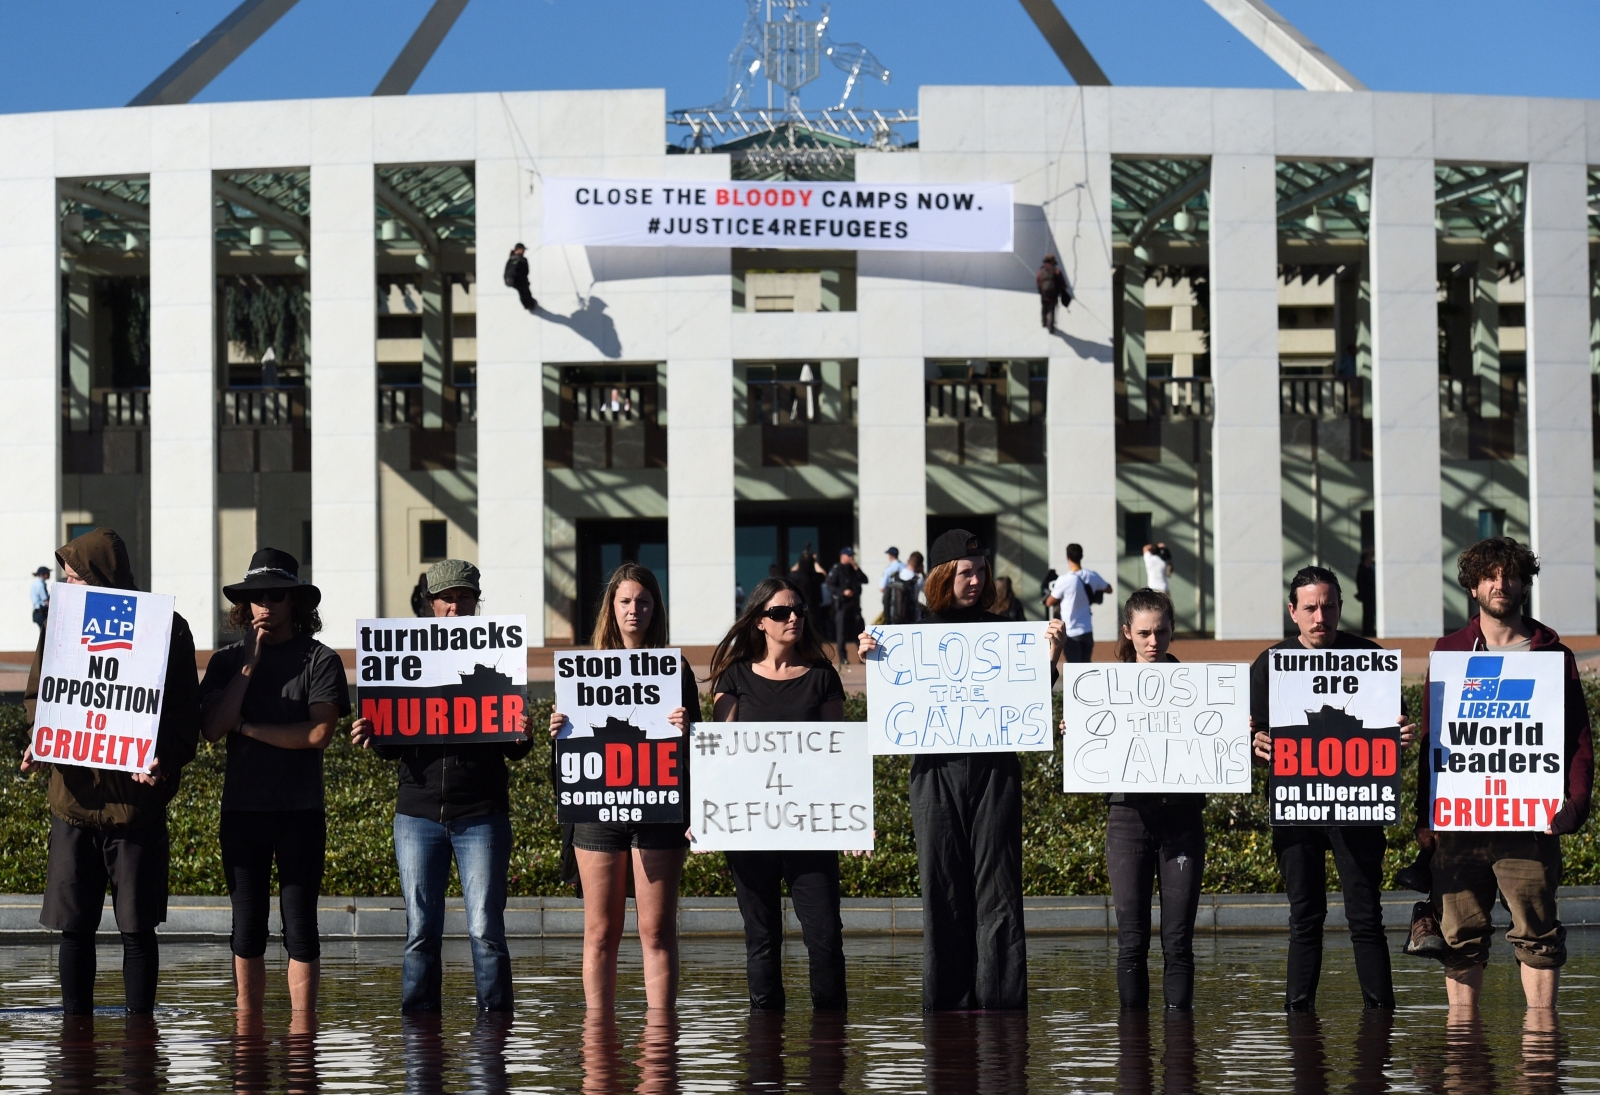 Australia Activists Protest Outside Parliament For Second Day Over Asylum Seekers 2862